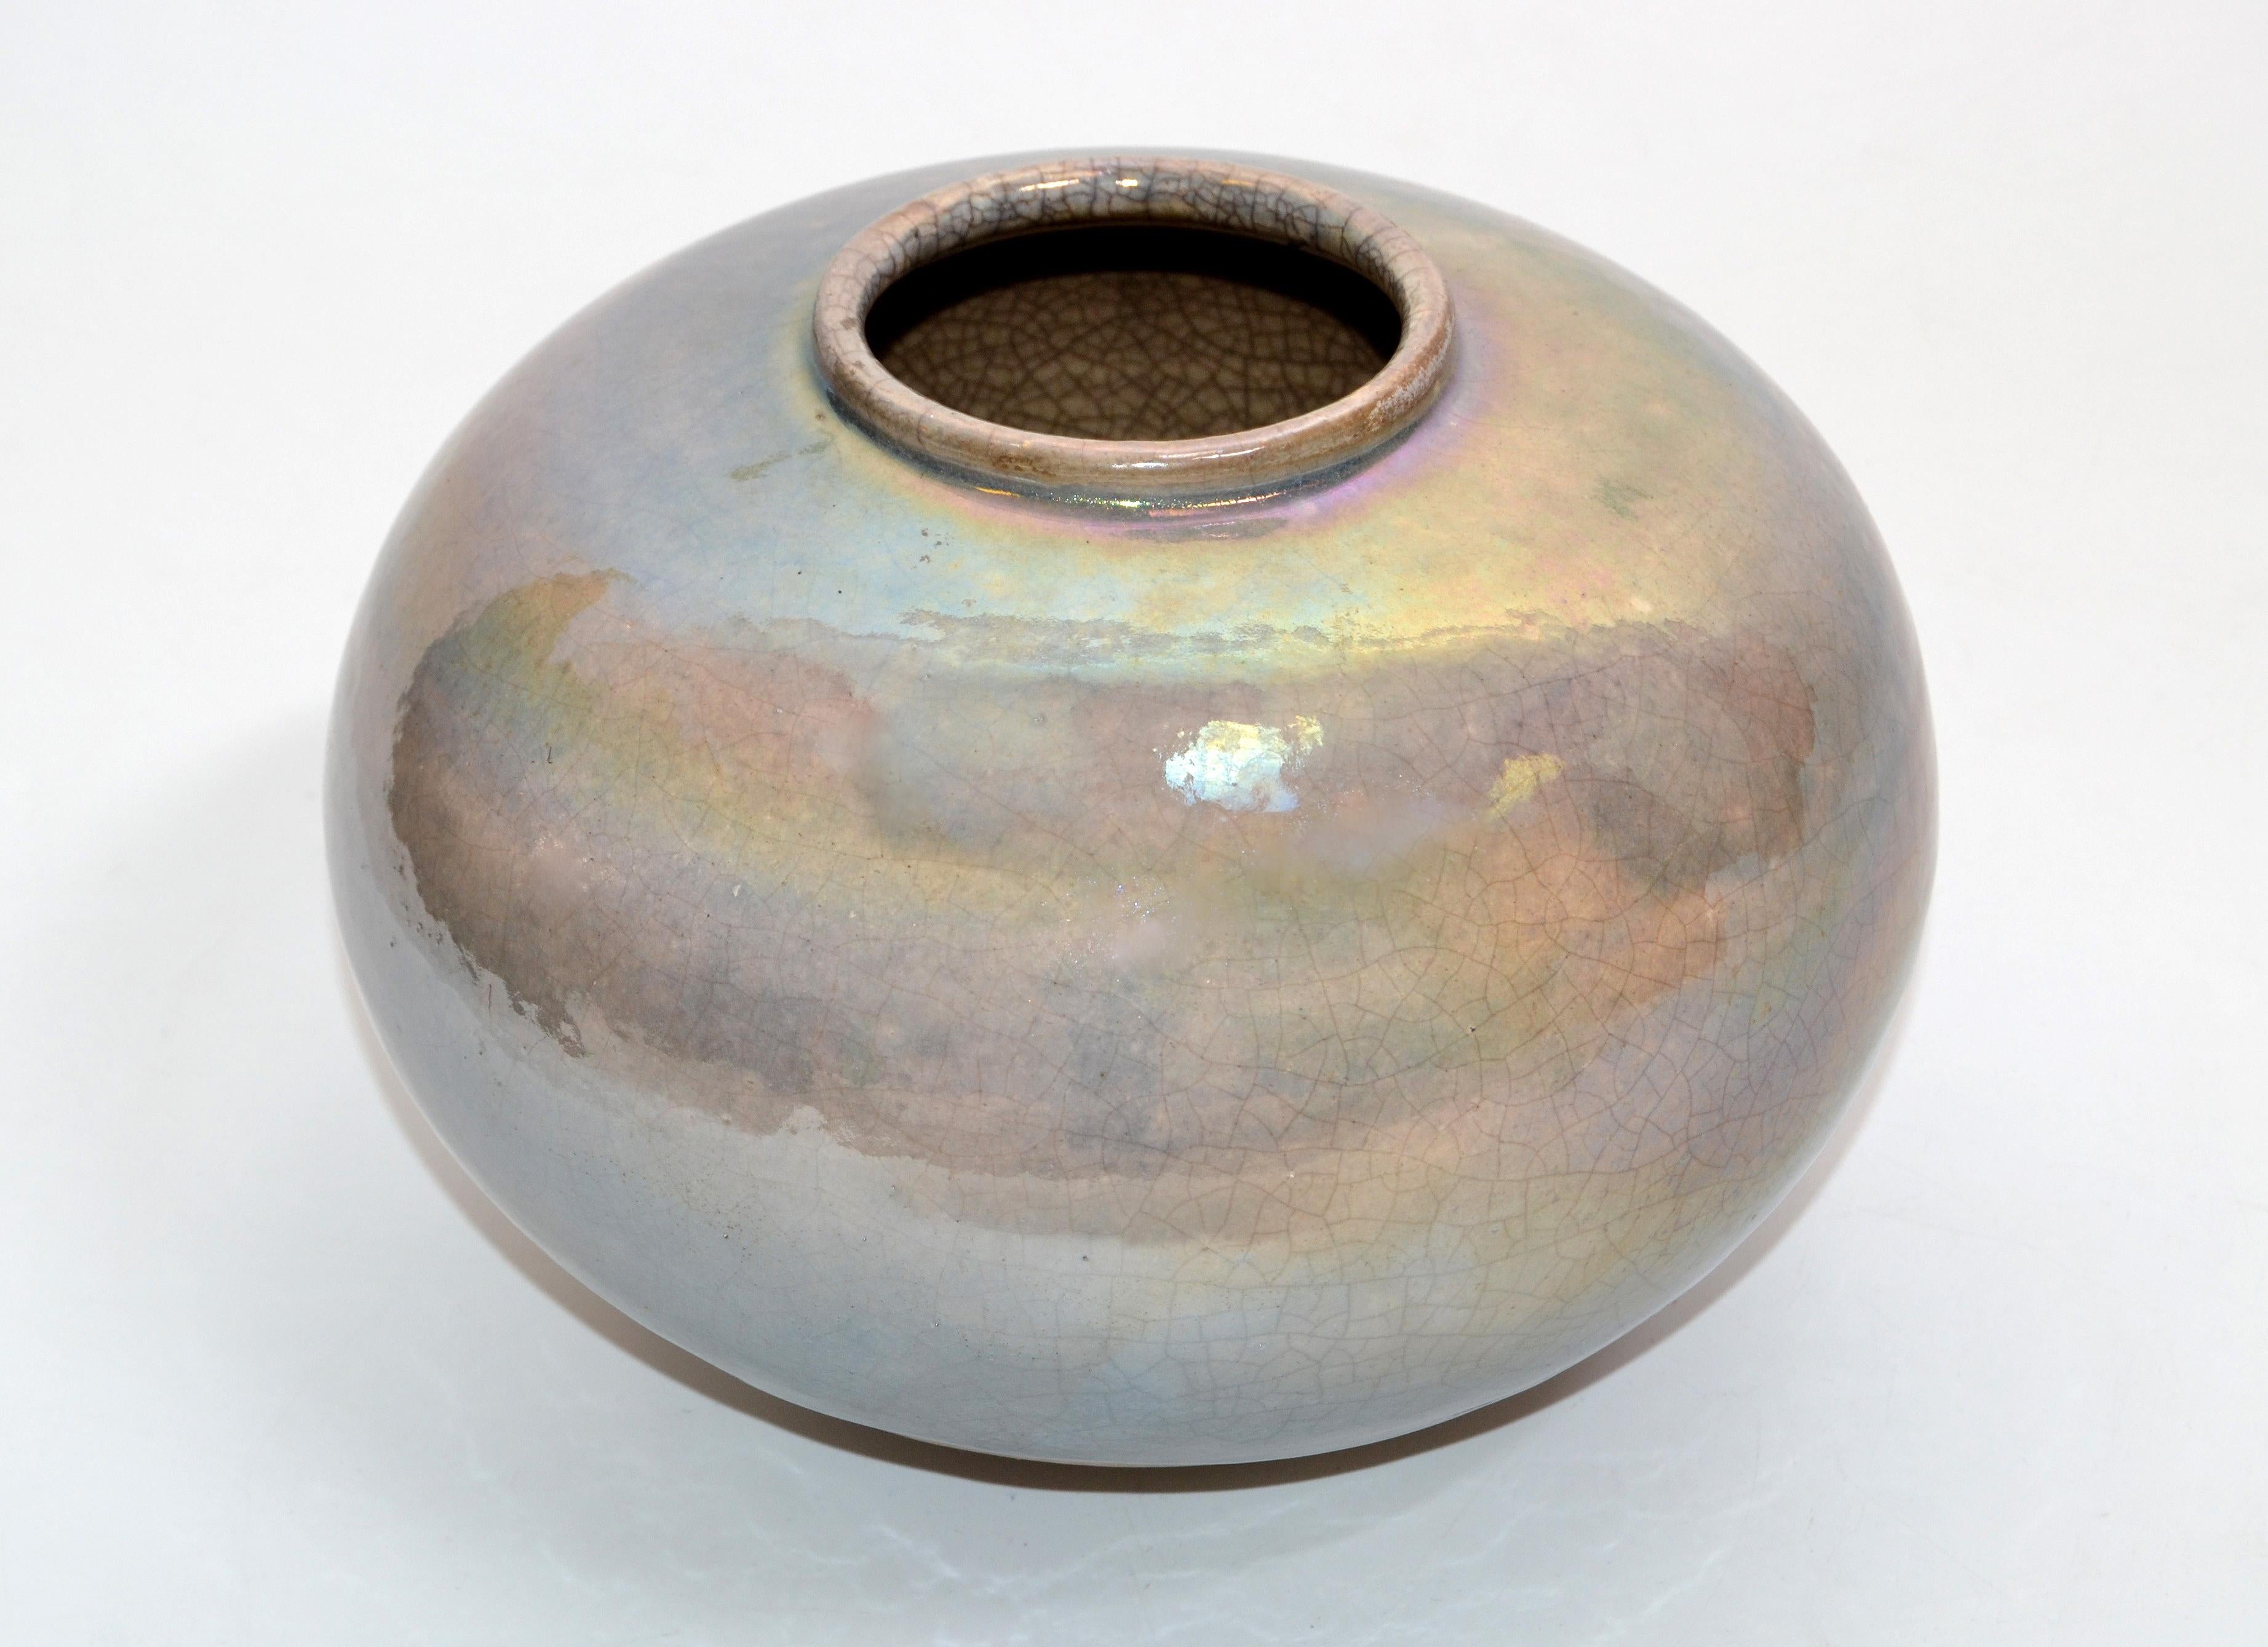 Contemporary earthenware handcrafted dove gray and blue with drip glaze bowl.
Signed by Artist at the base.
Pottery Art in superb craftsmanship.